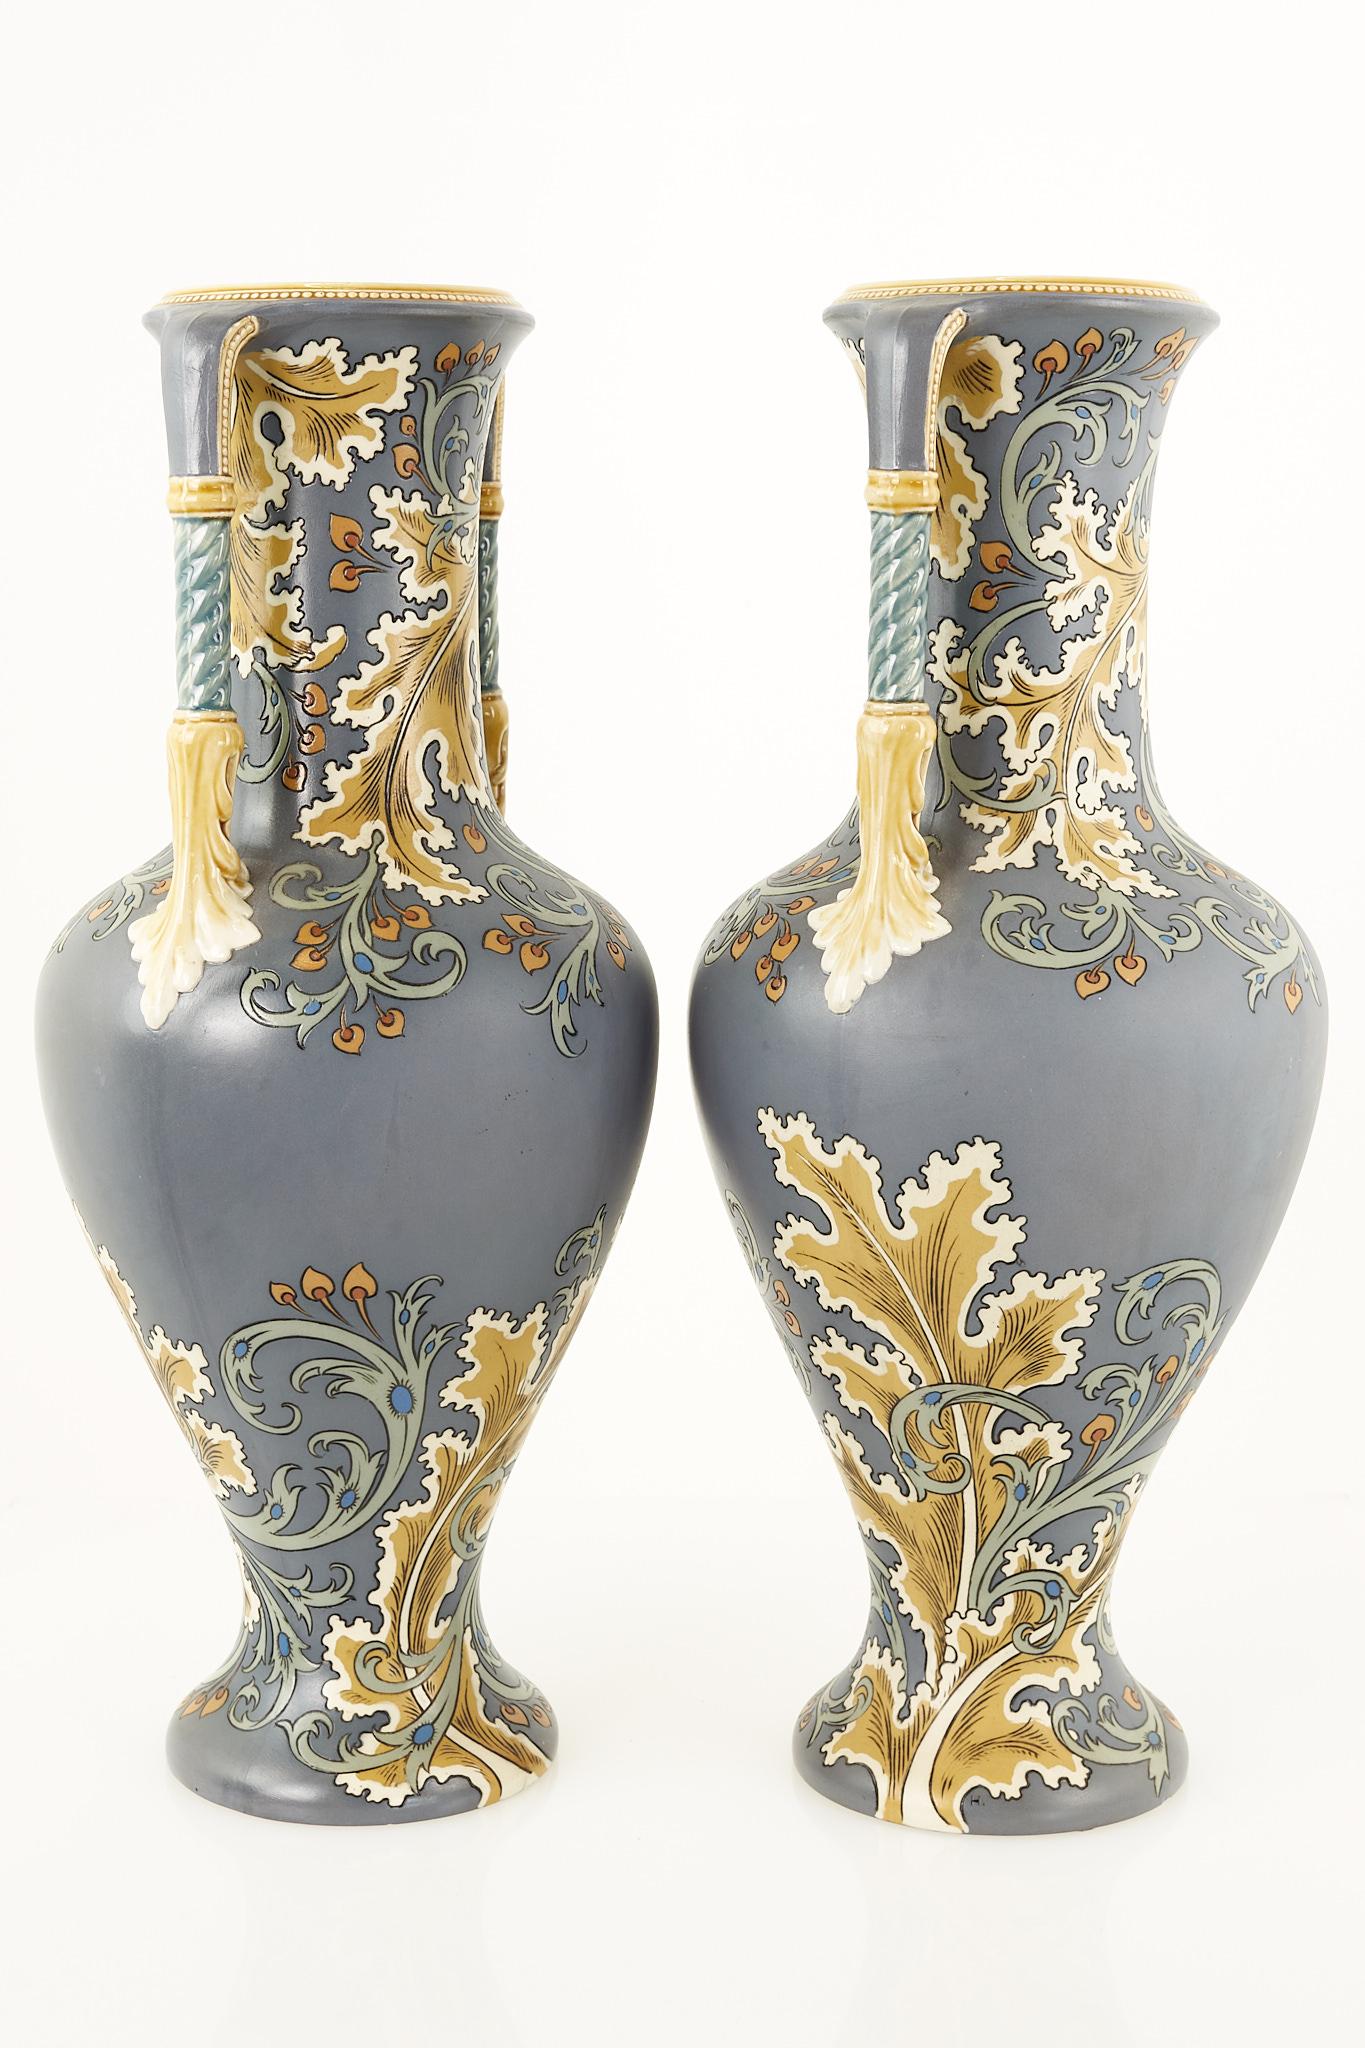 Floral Art Nouveau Vase by Mettlach, Later Villeroy & Boch, a Pair In Good Condition For Sale In Countryside, IL